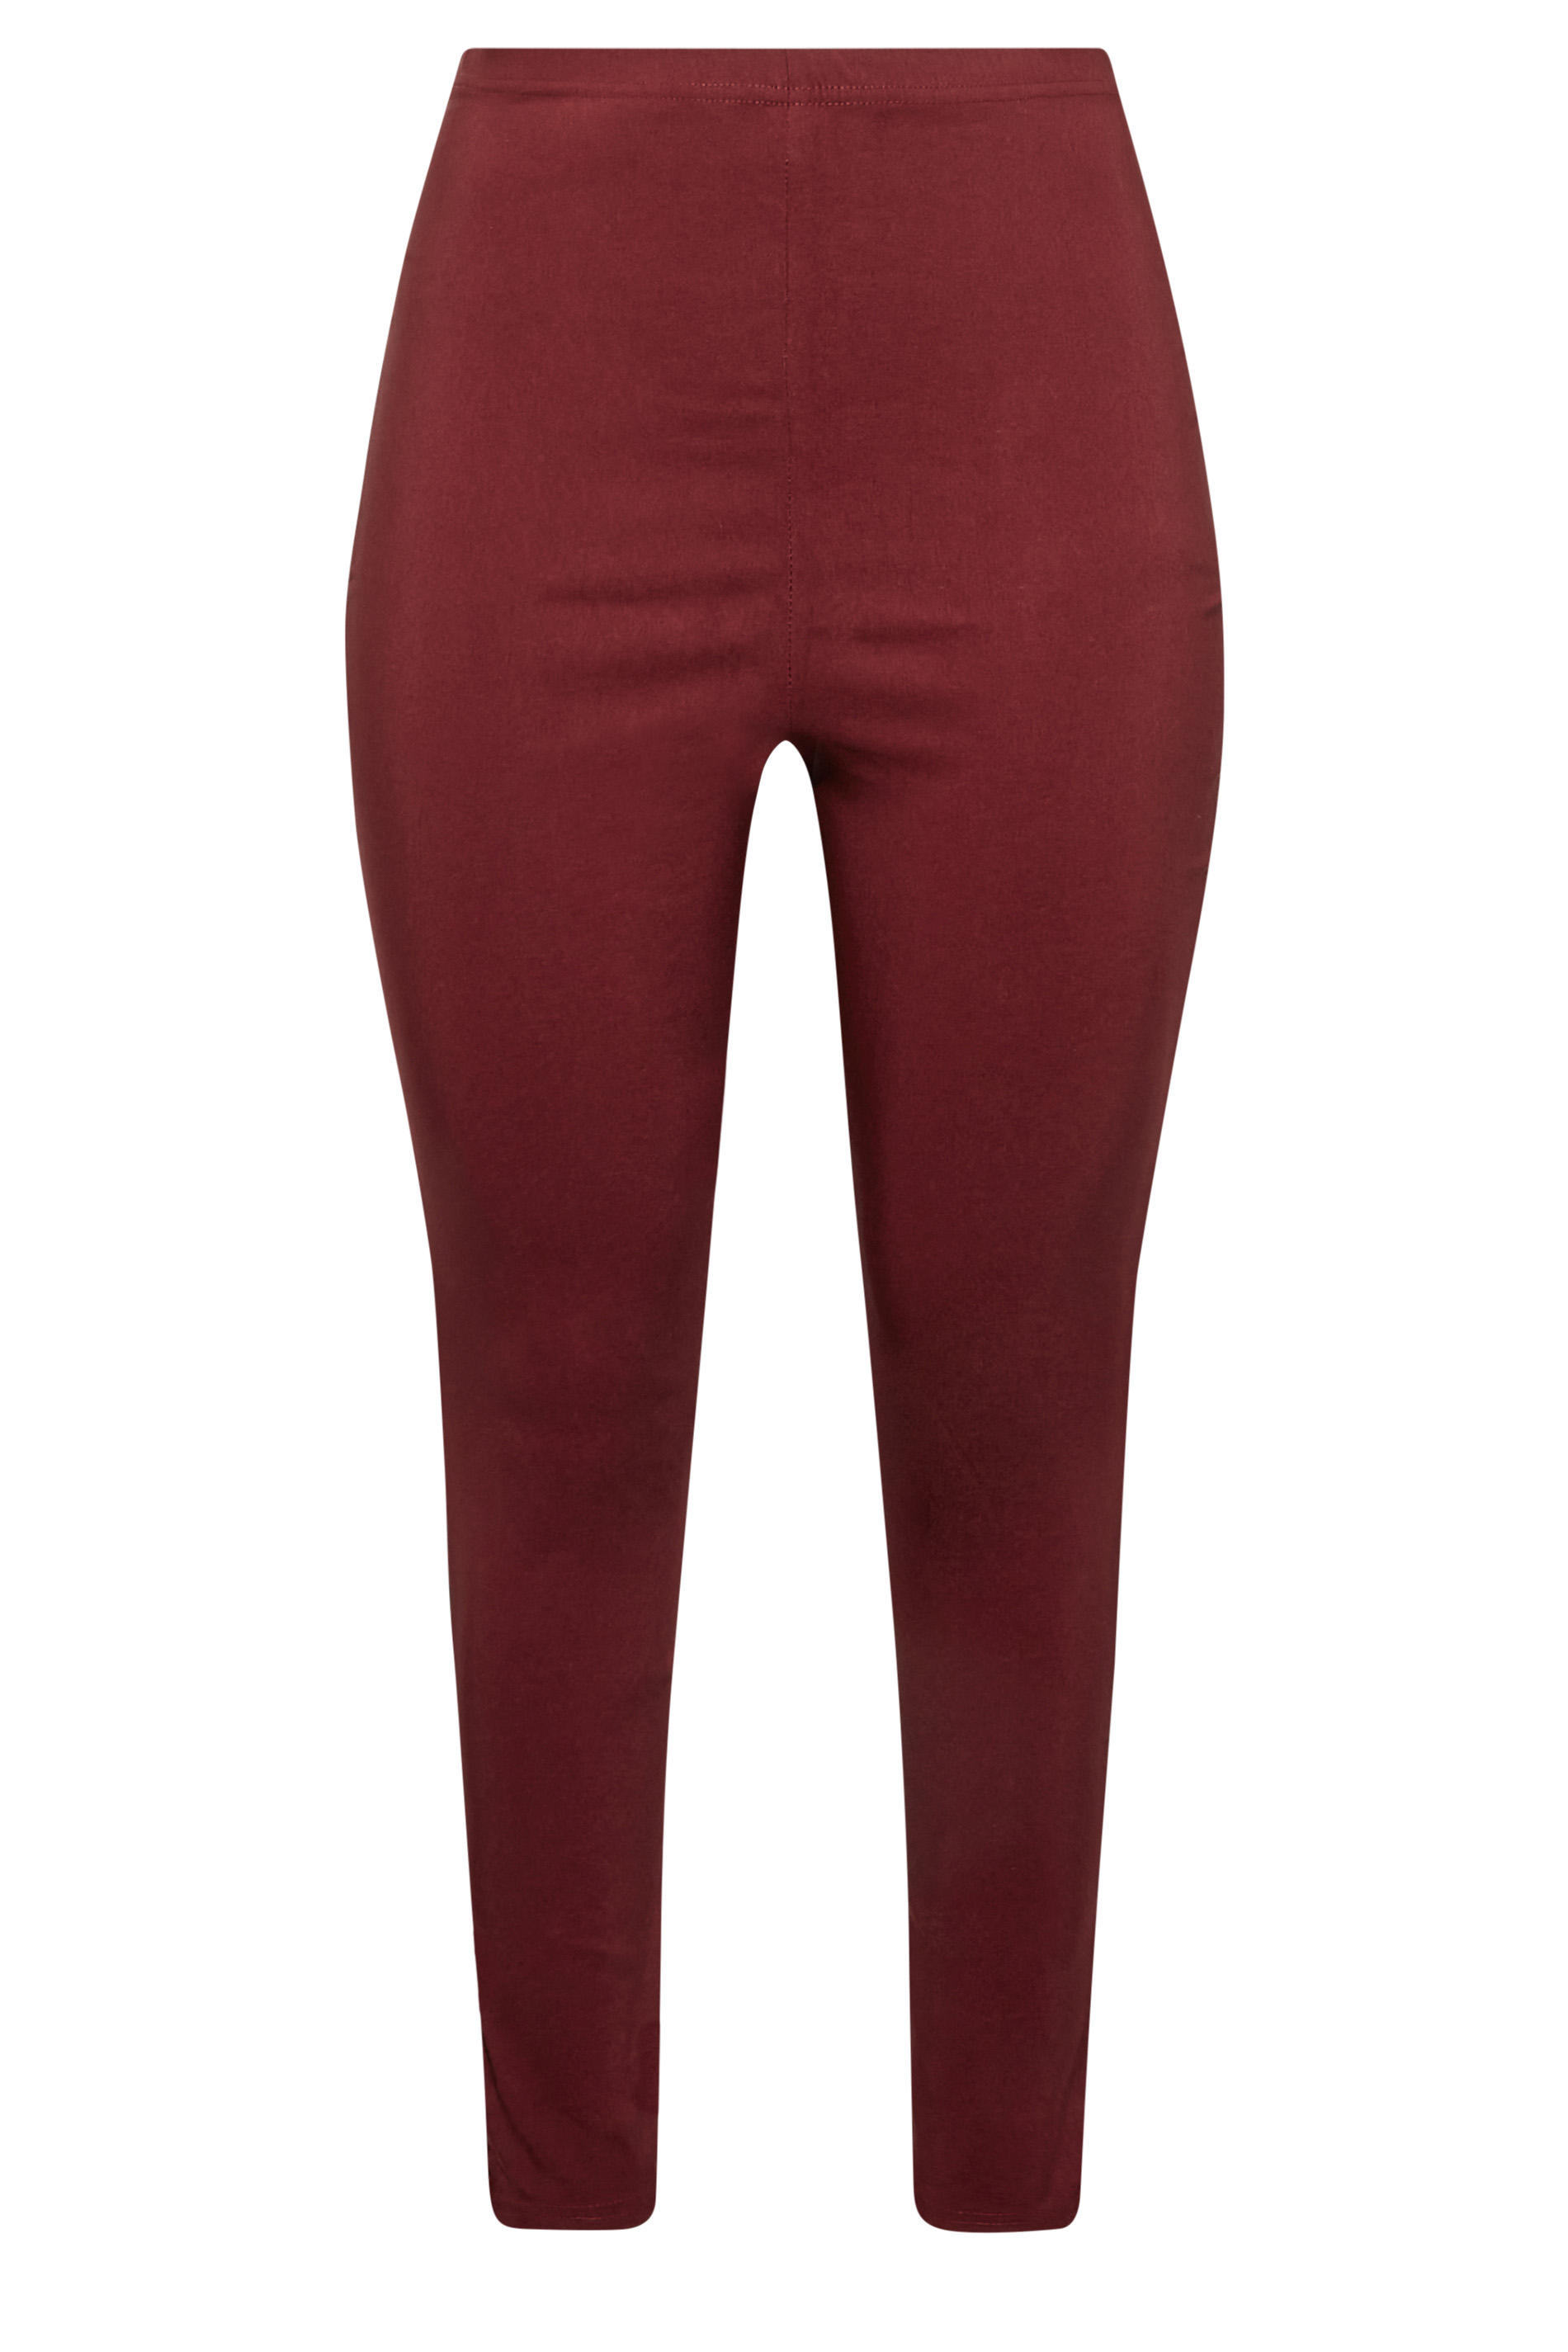 HM Superstretch trousers  Red high waisted pants Hm trousers Maroon  jeans